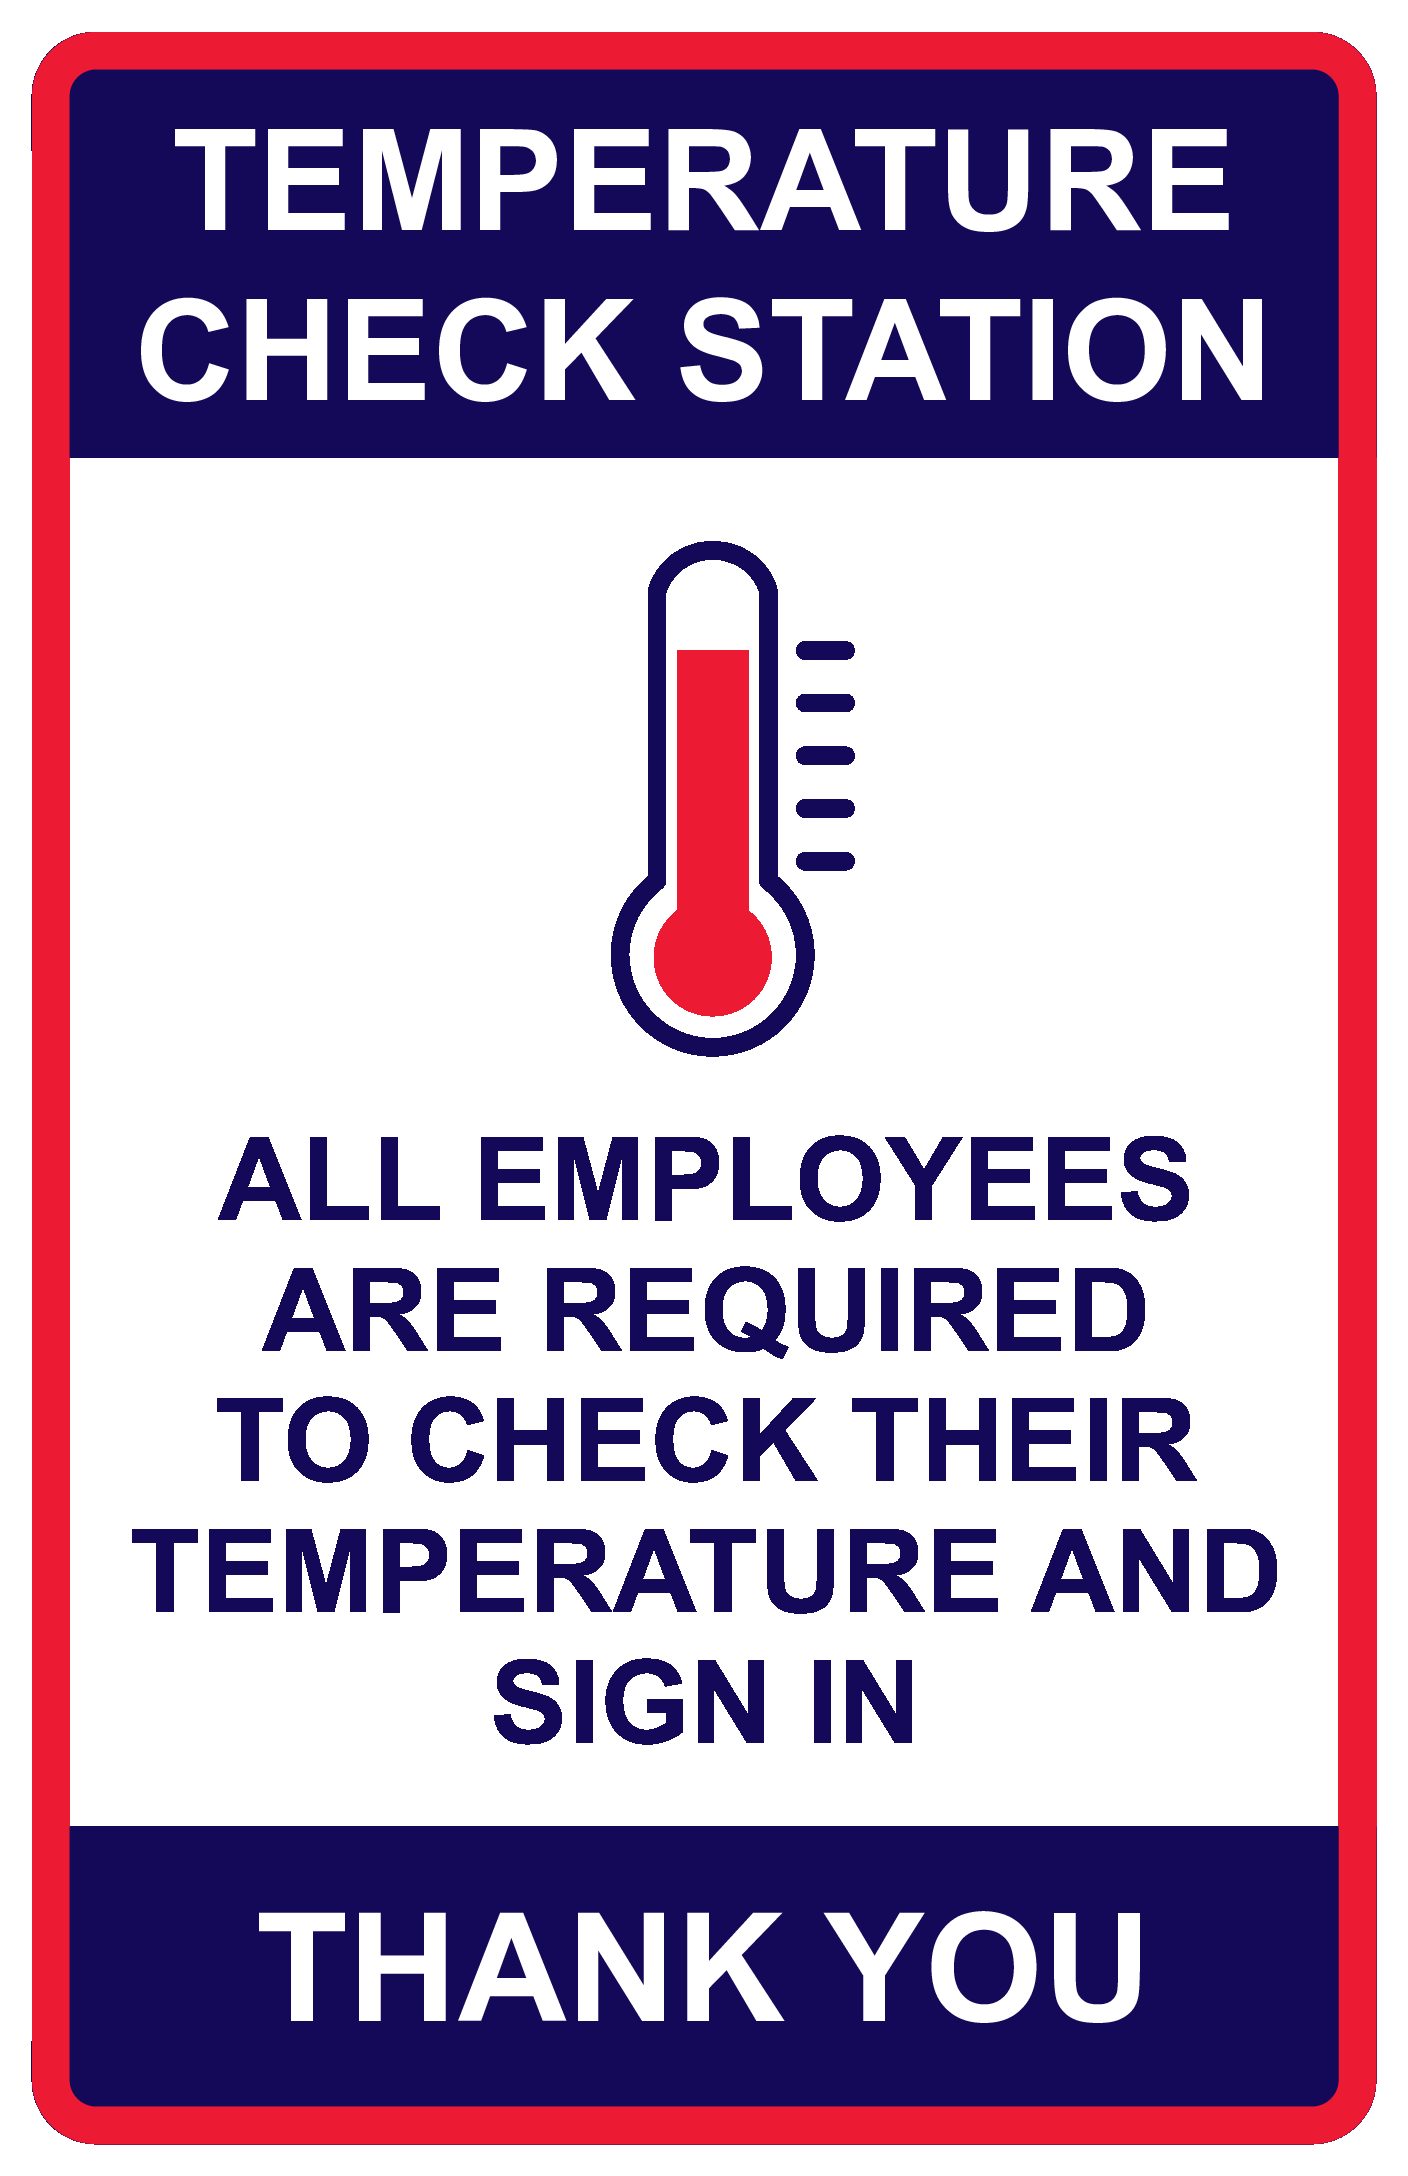 Back to work: Are workplace temperature checks enough?